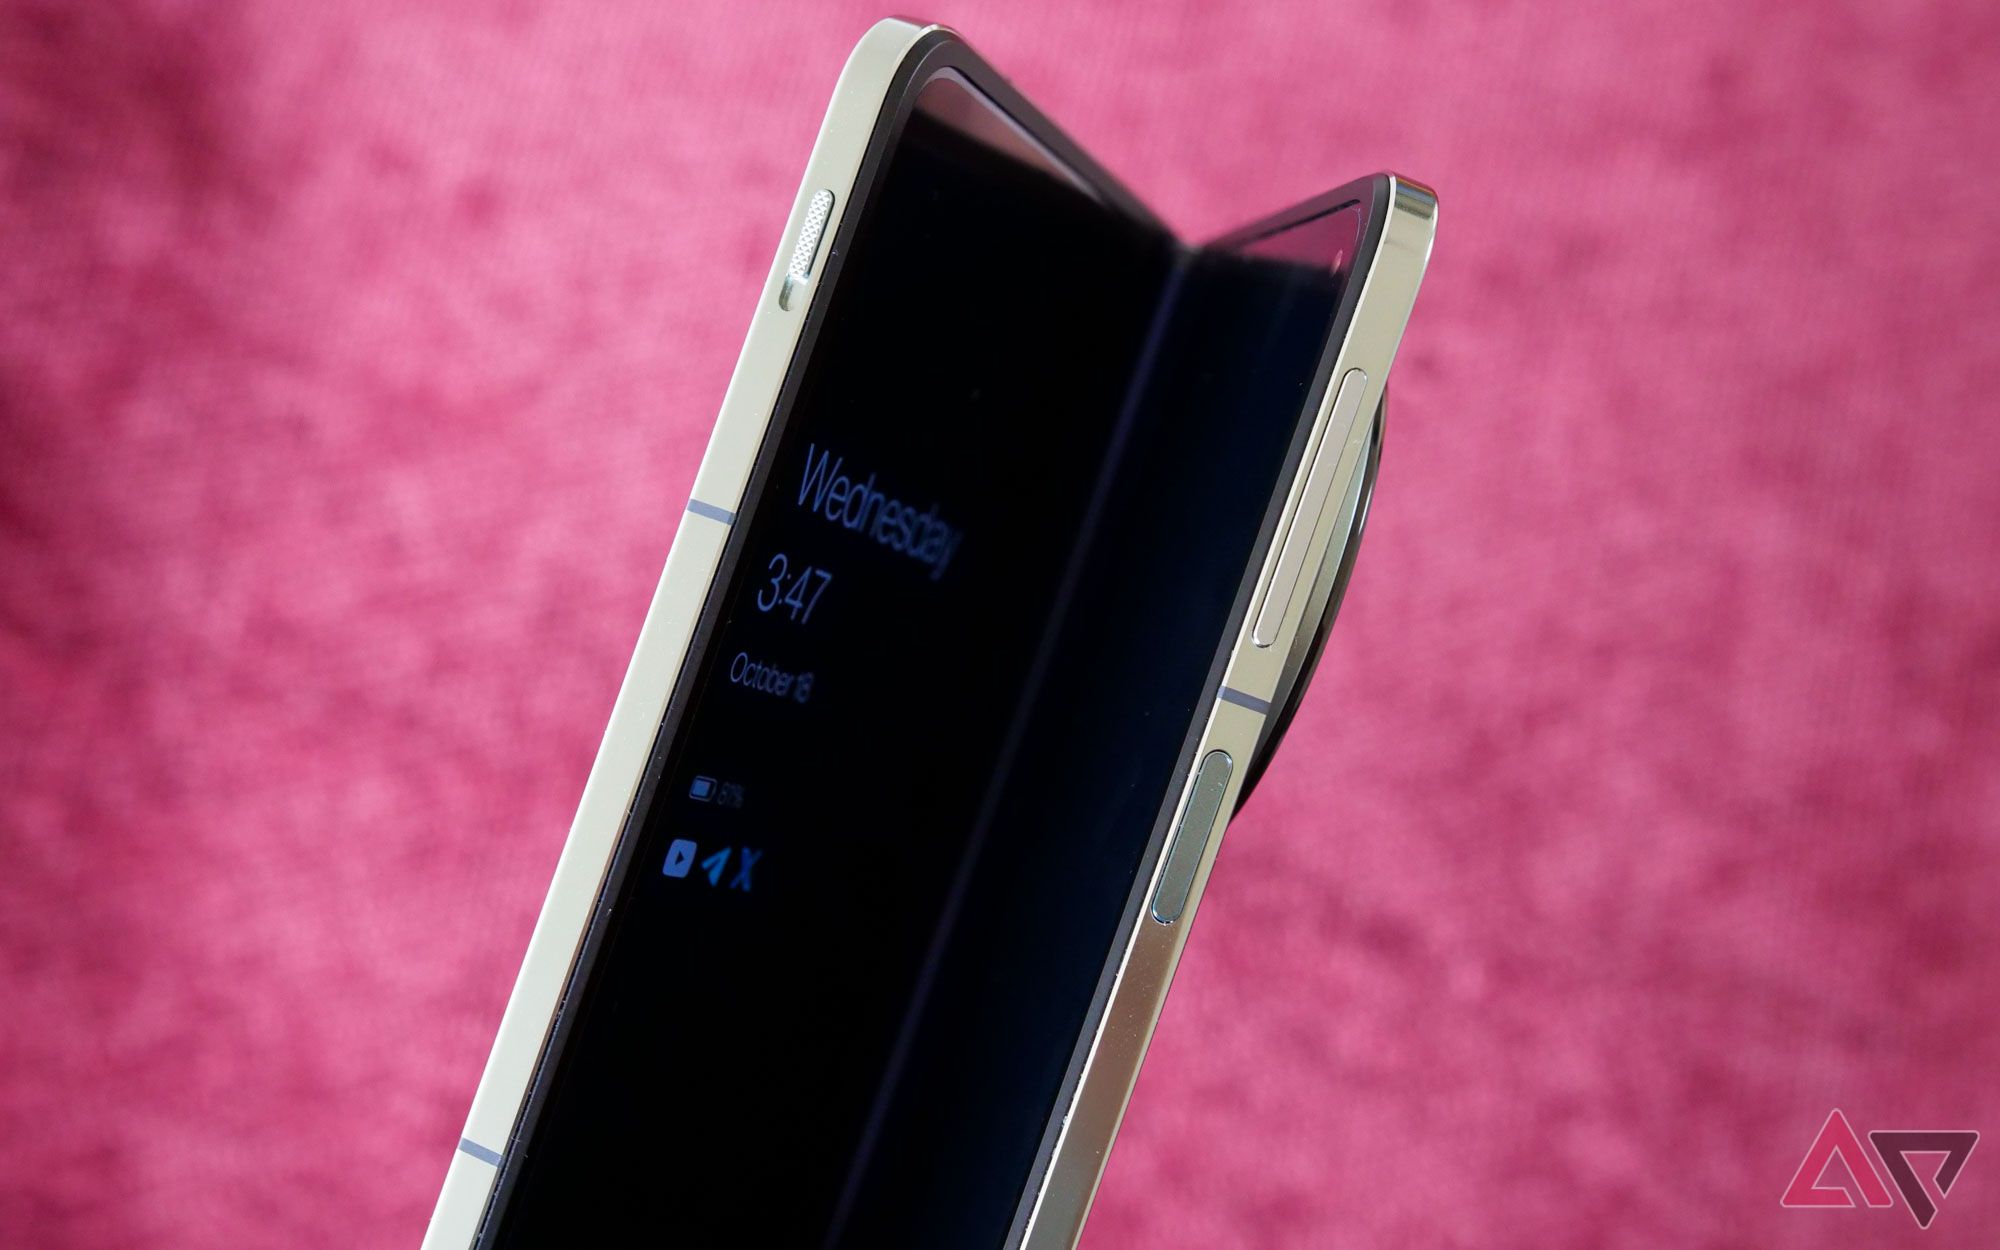 Find N3 Flip review: OPPO's 2nd-gen clamshell-style phone packs a surprise